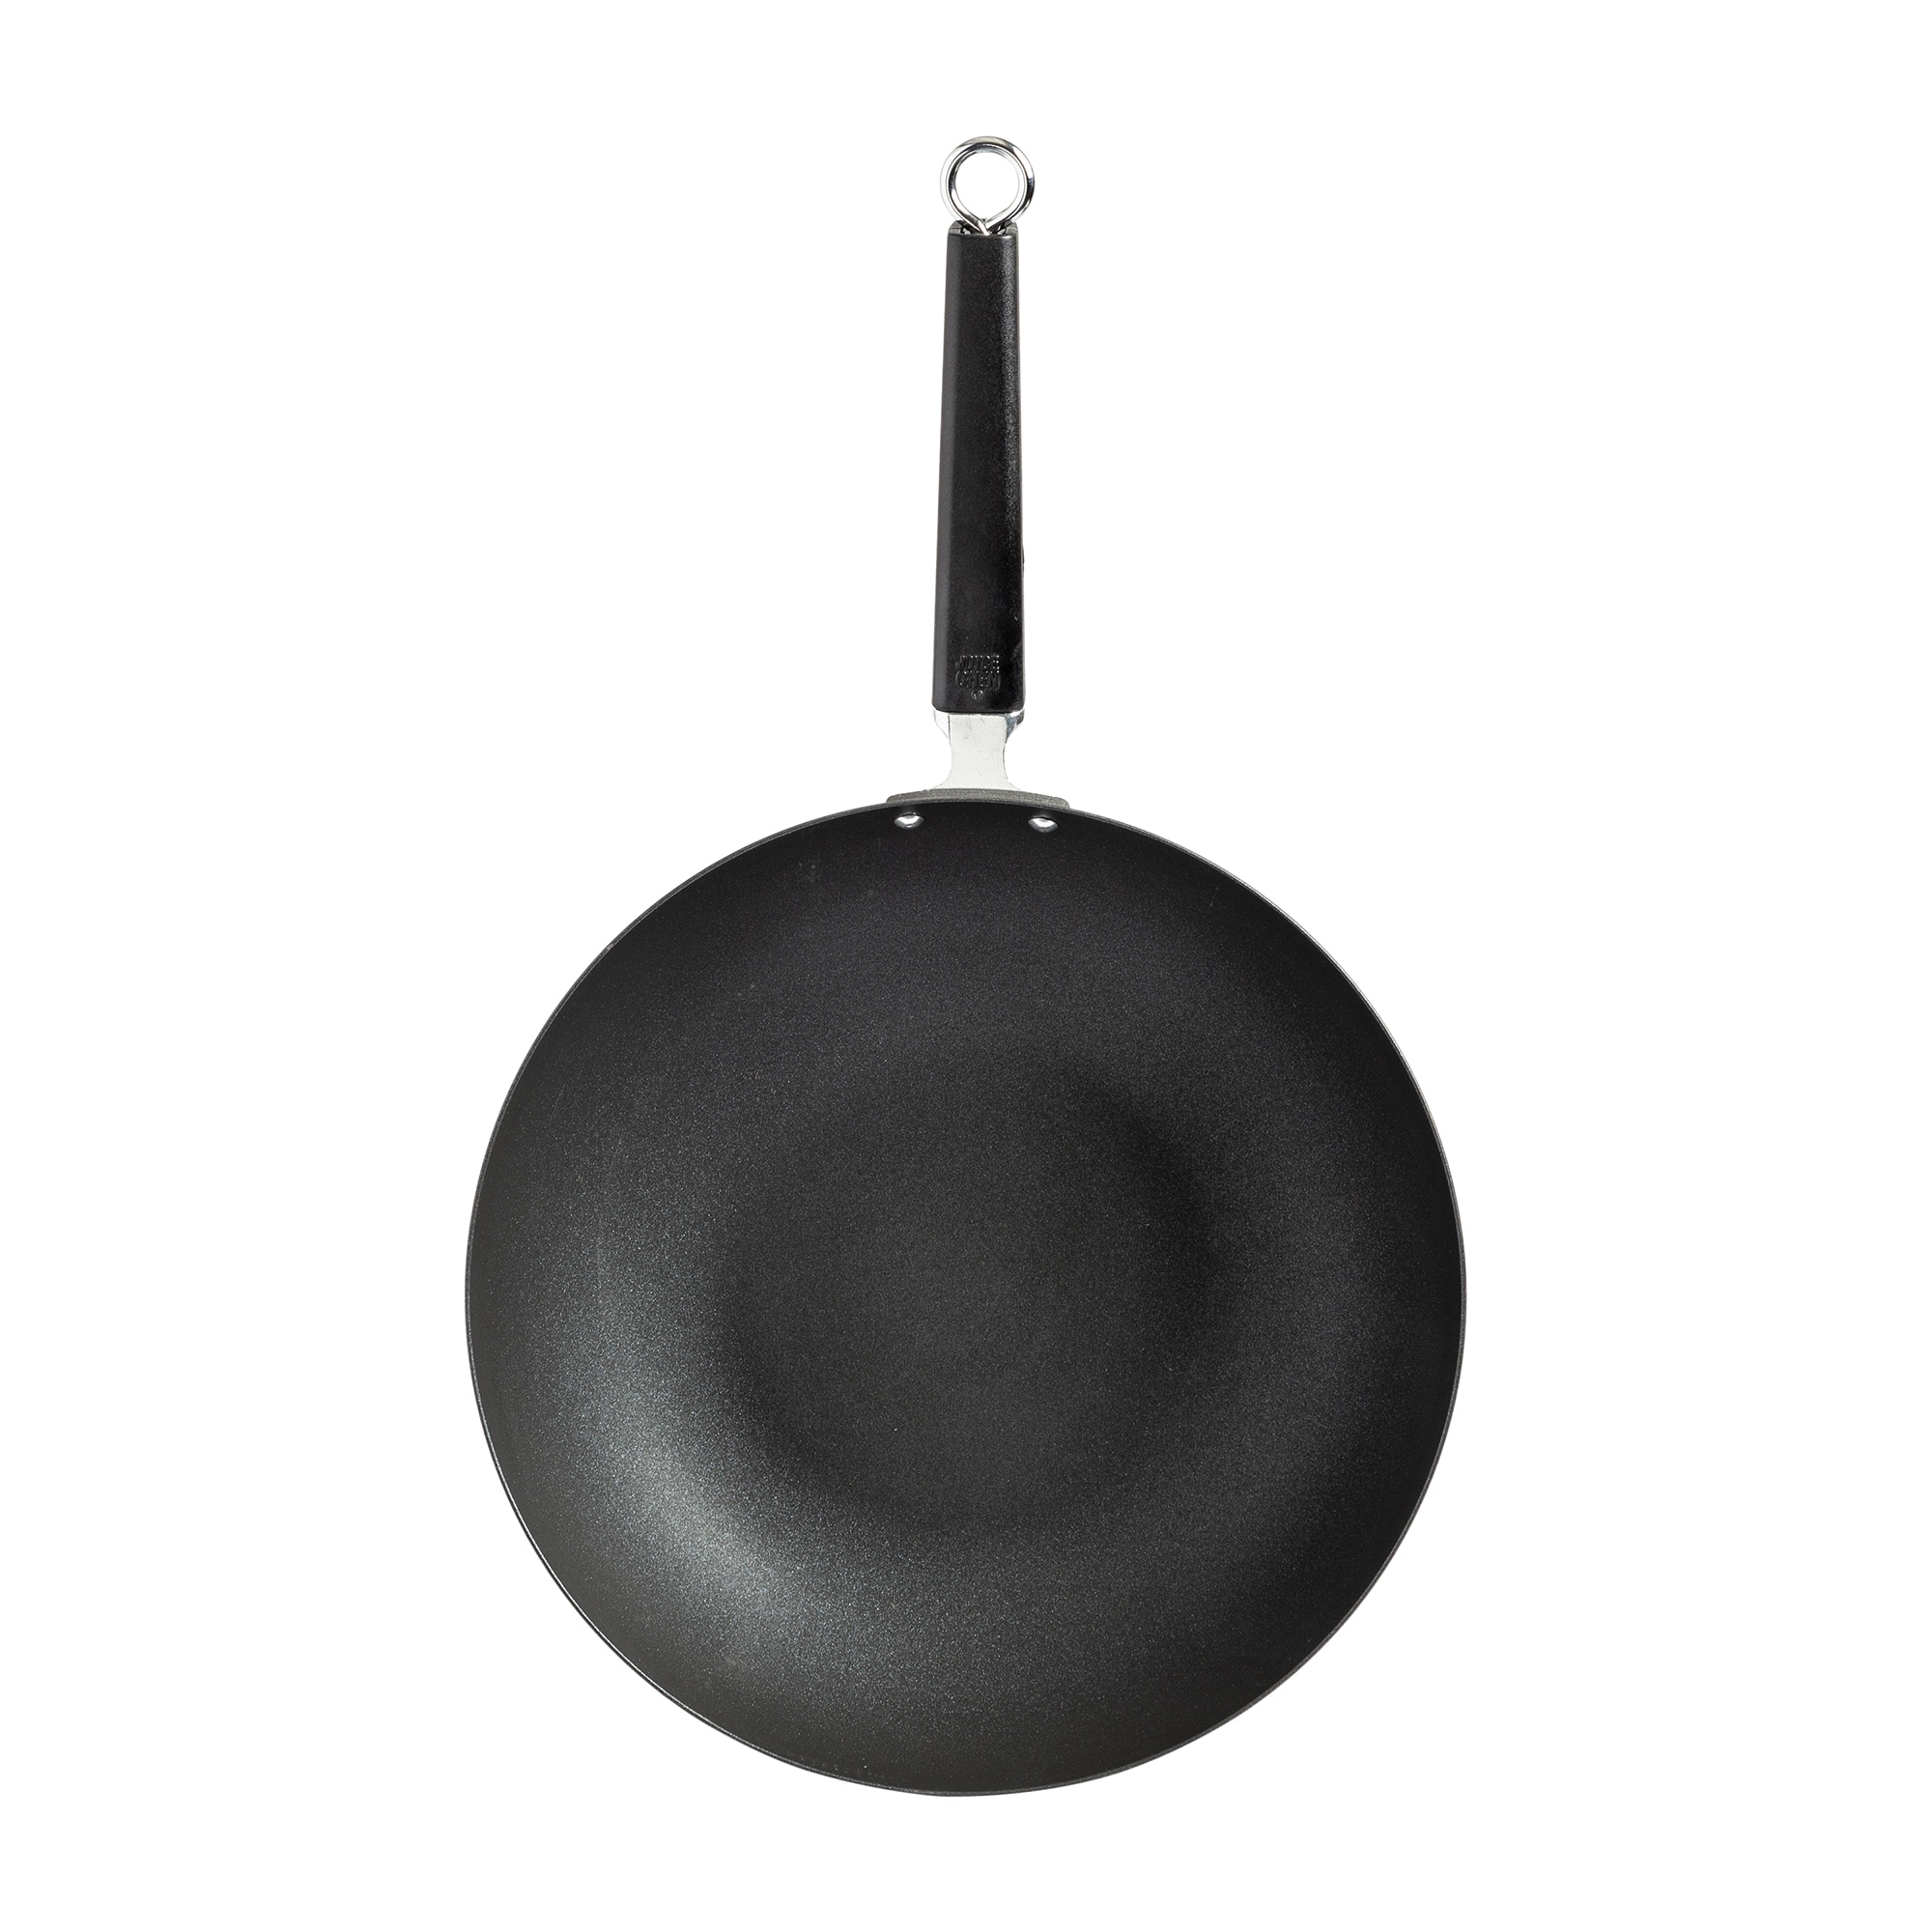 Joyce Chen 14-inch Carbon Steel Nonstick Wok Set with Lid and Bakelite Handles, 4 Pieces, Silver